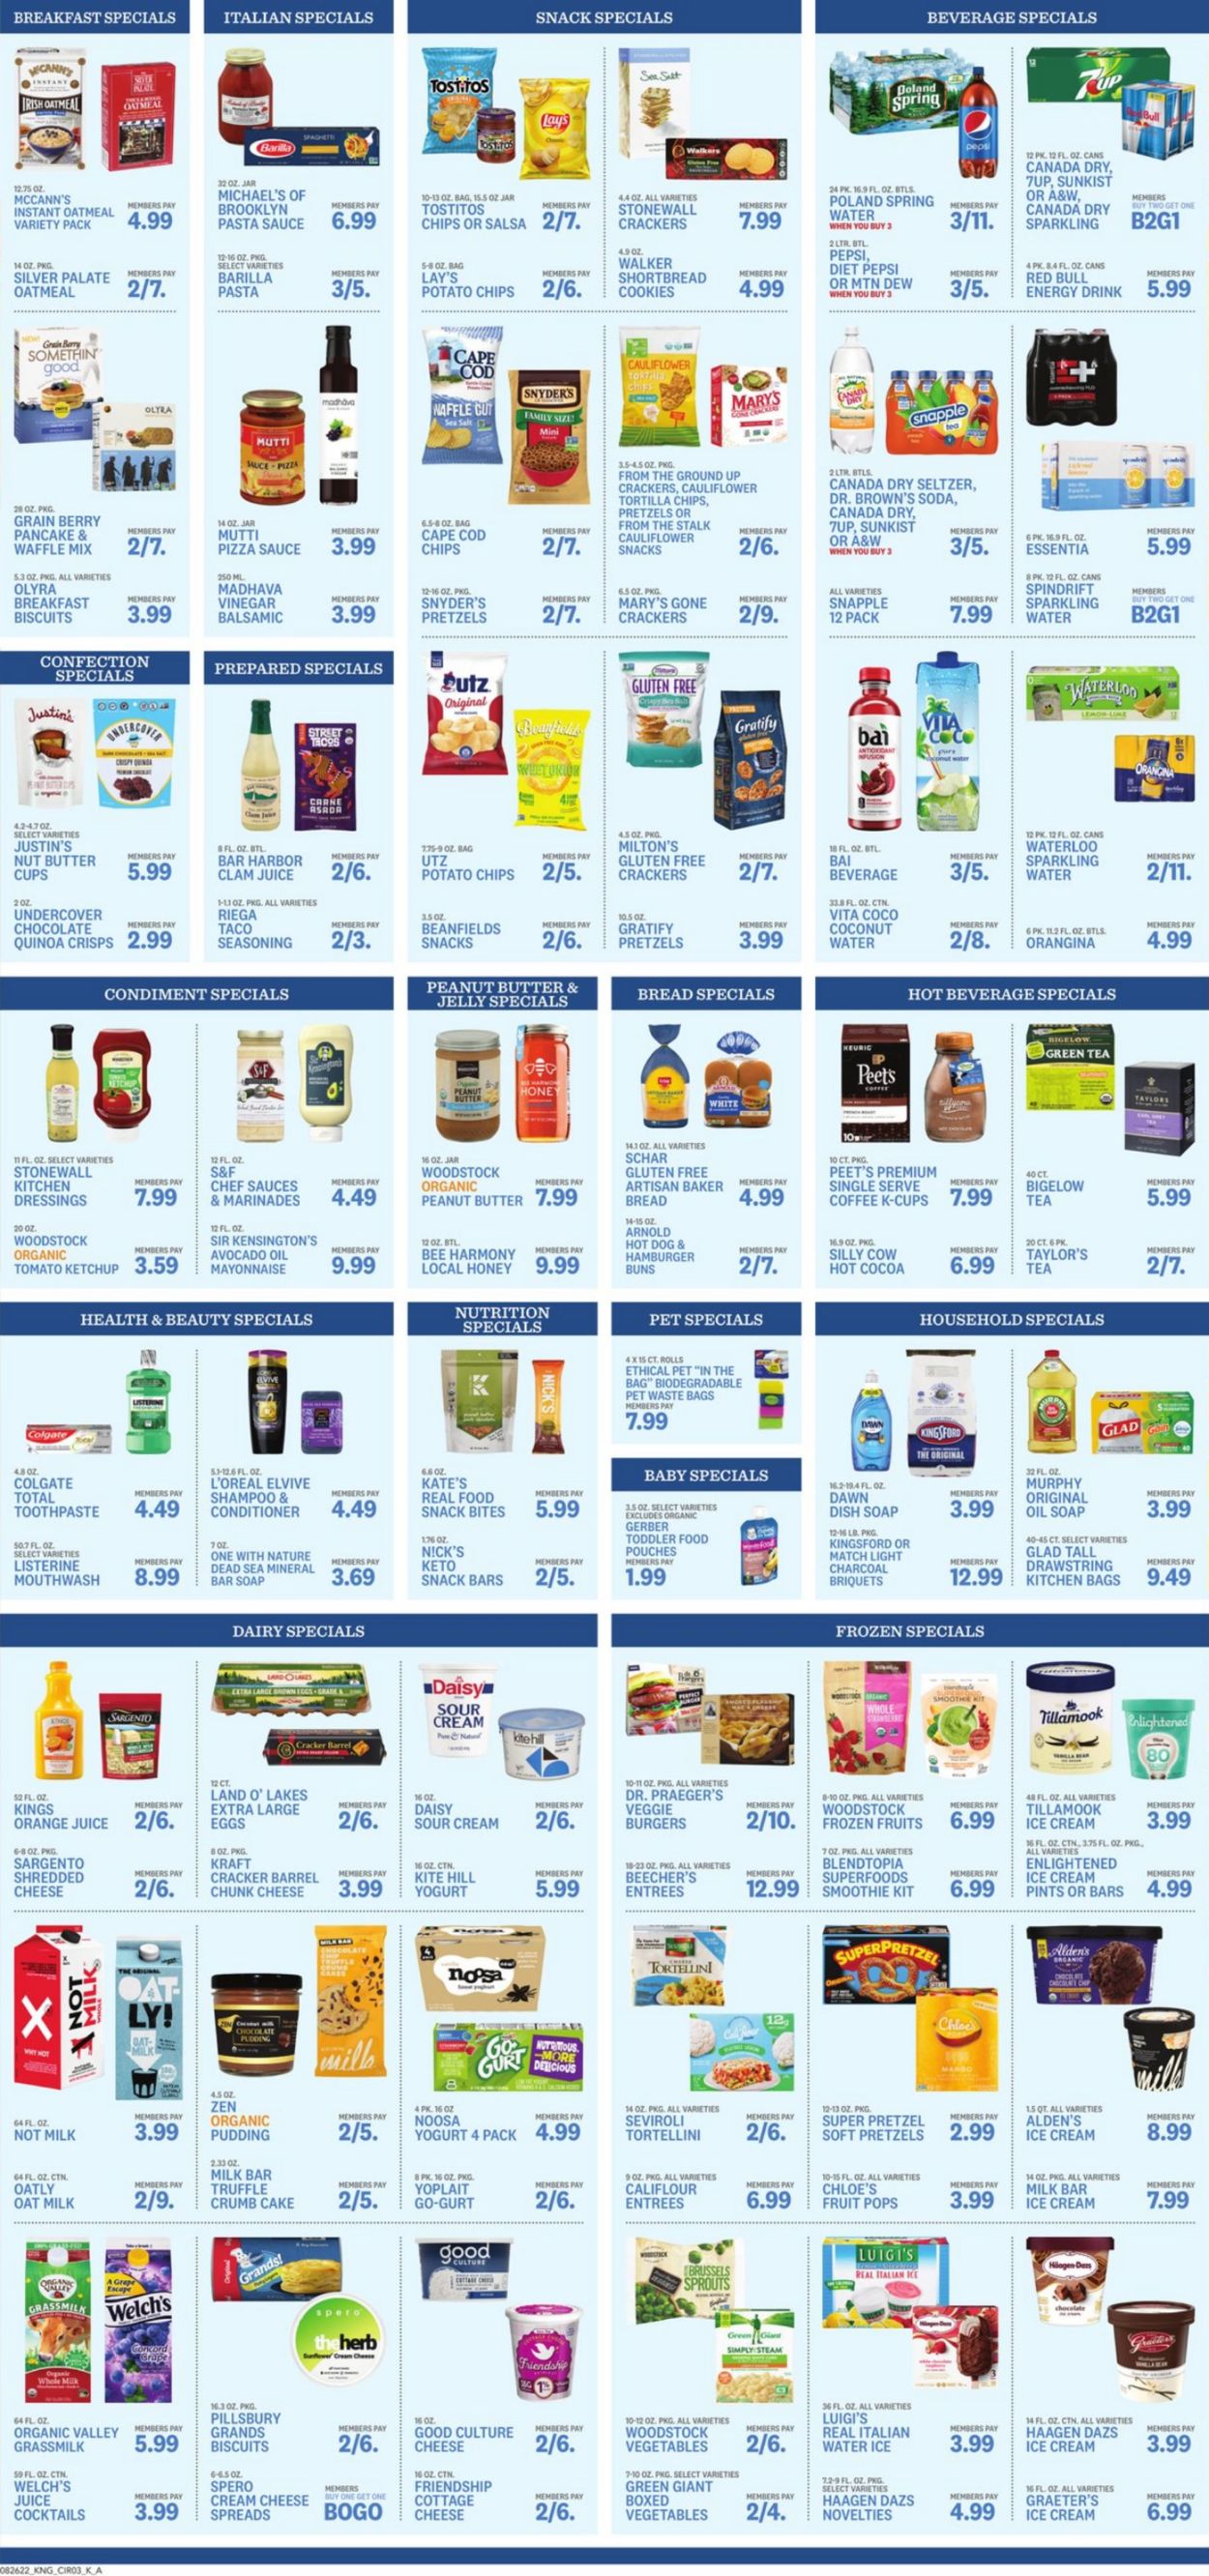 Catalogue Kings Food Markets from 08/26/2022